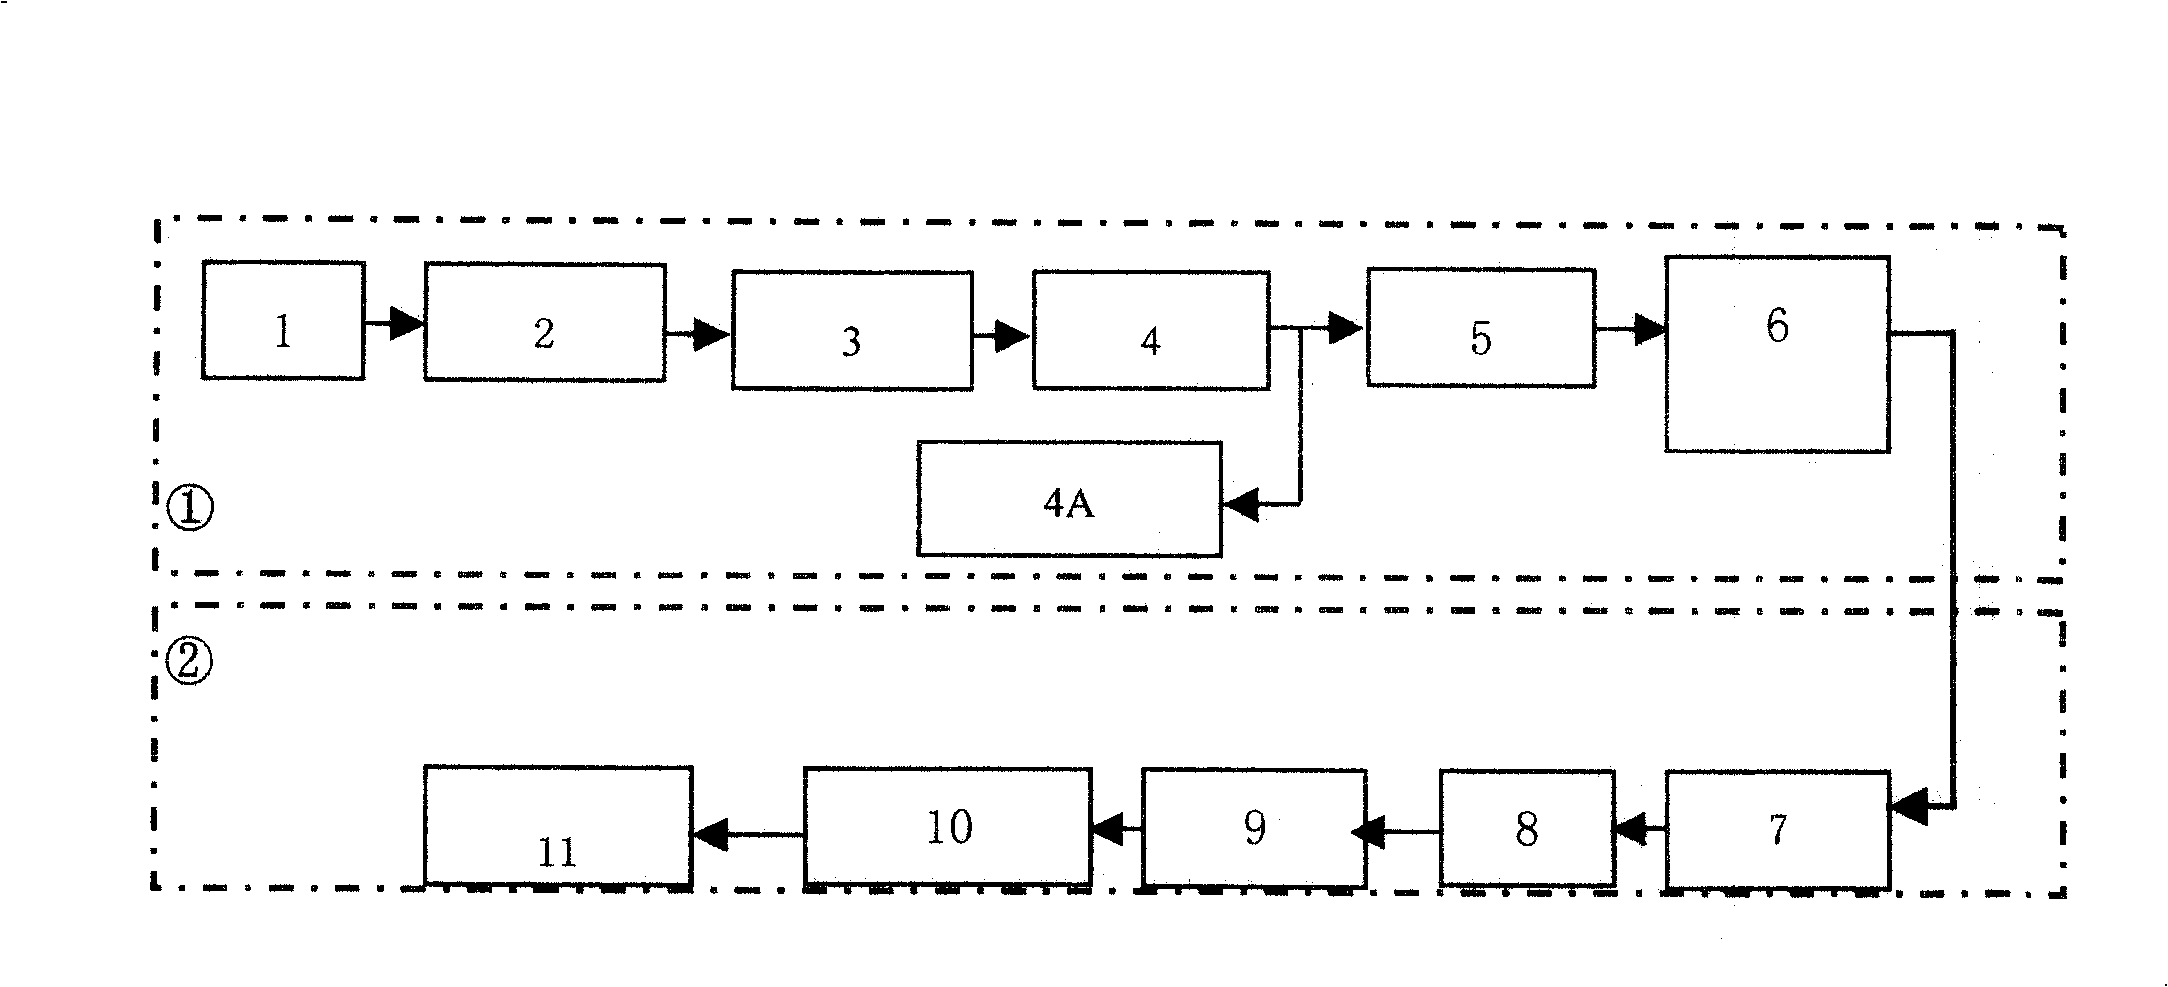 Silver-nickel electric contact producing technology